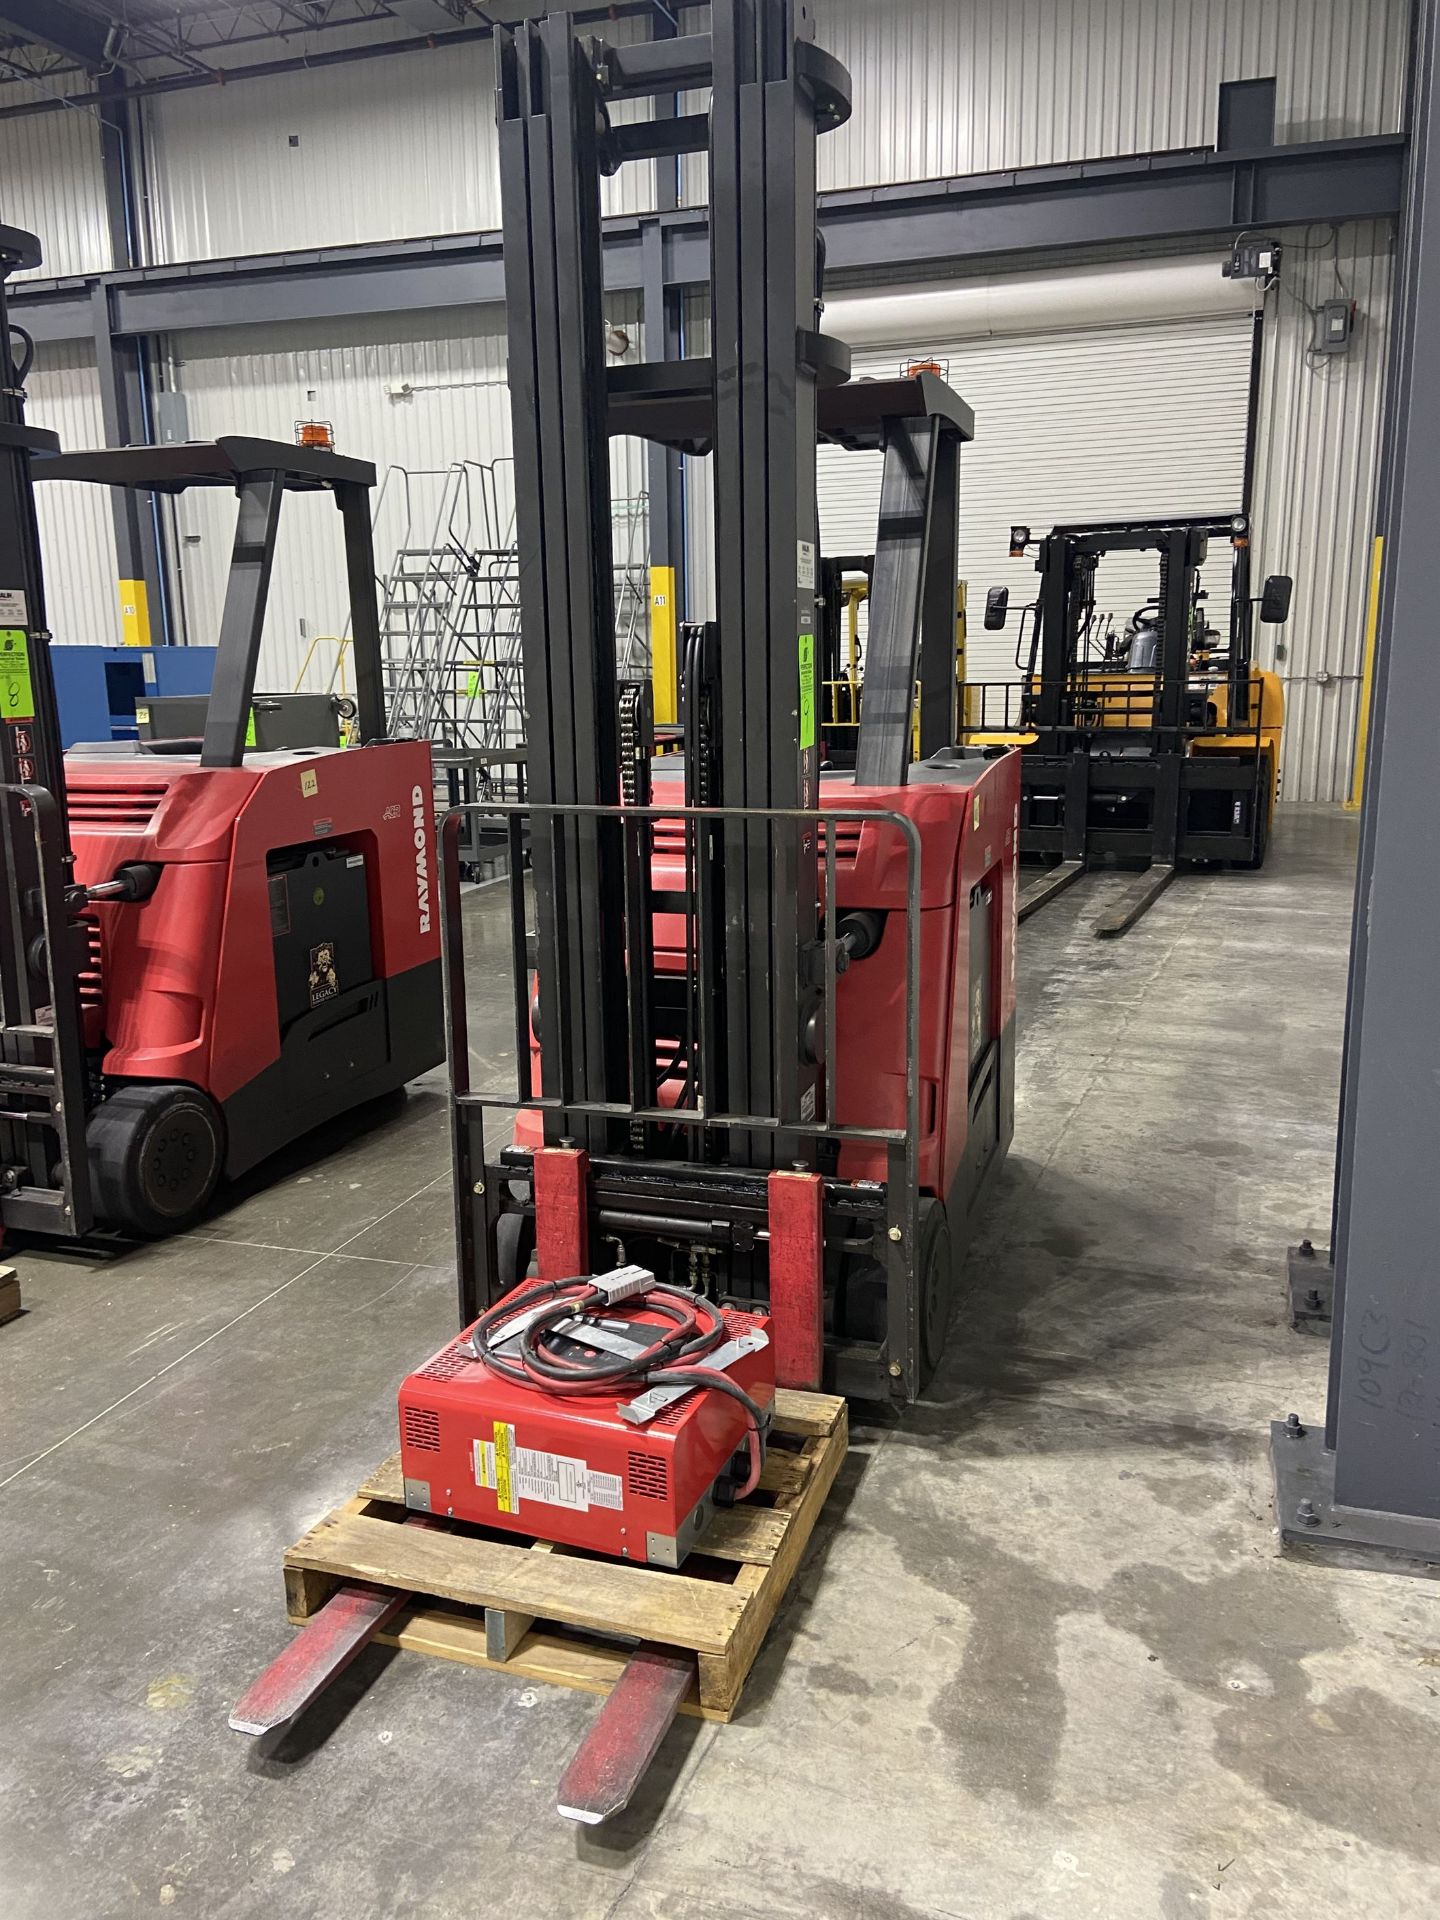 2018 RAYMOND 425-C50TT 5,000 lb Electric Stand Up Forklift, s/n 425-18-57539, w/ 36V Charger, 251"